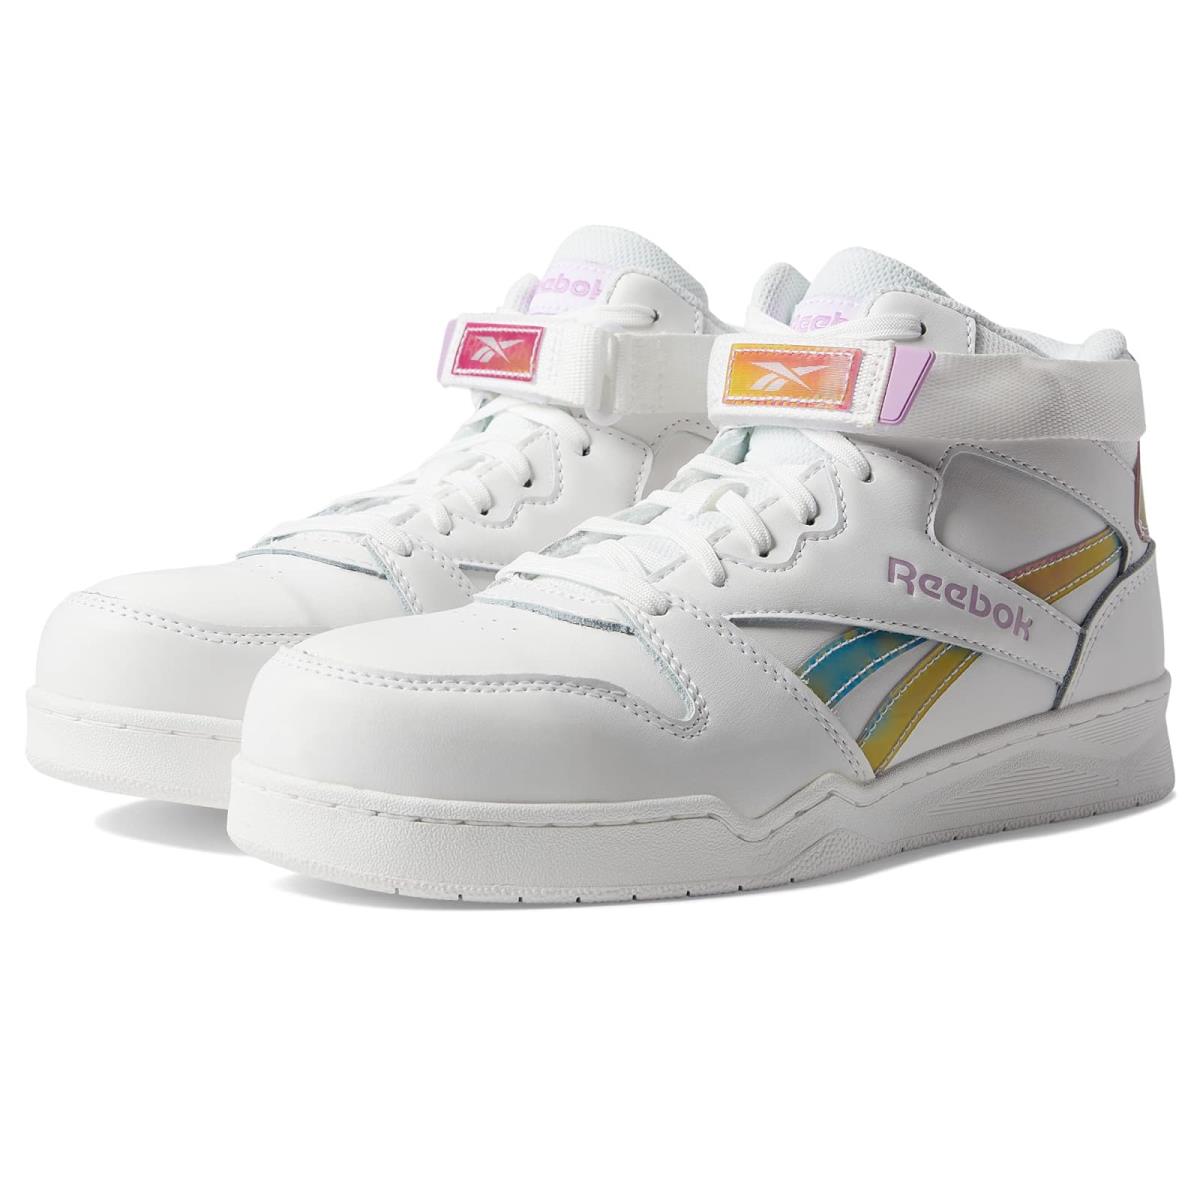 Woman`s Sneakers Athletic Shoes Reebok Work BB4500 Work EH Comp Toe White/Shiny